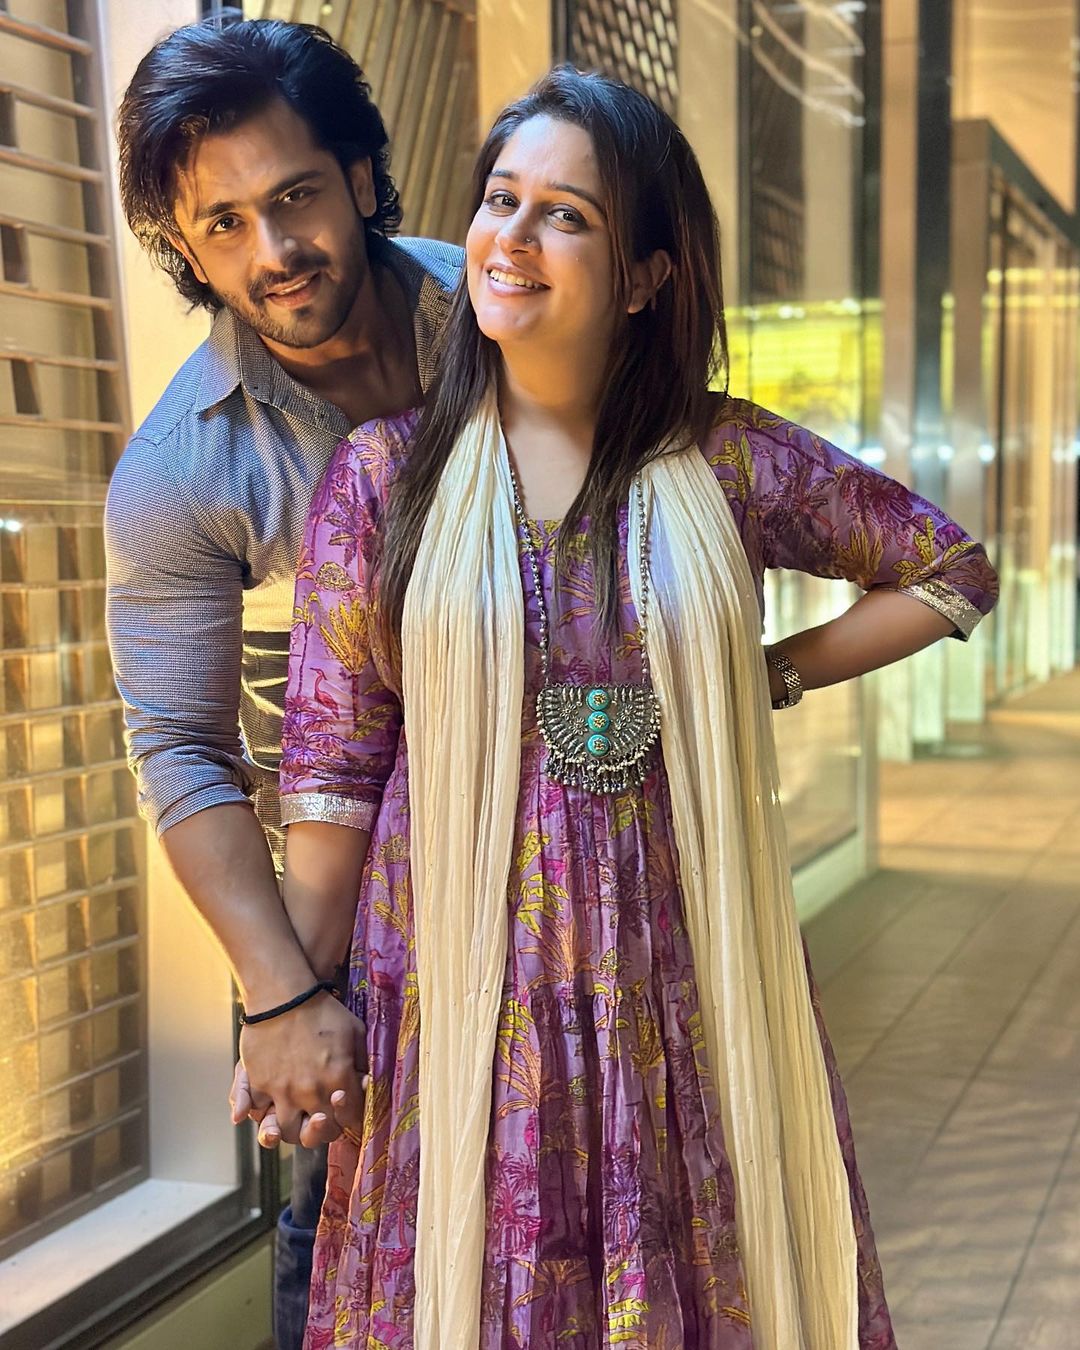 The Life And Soul Of The Party! Ideal Couple Dipika Kakar And Shoaib Ibrahim Celebrate A Special Birthday! Read To Know Whose It Is!